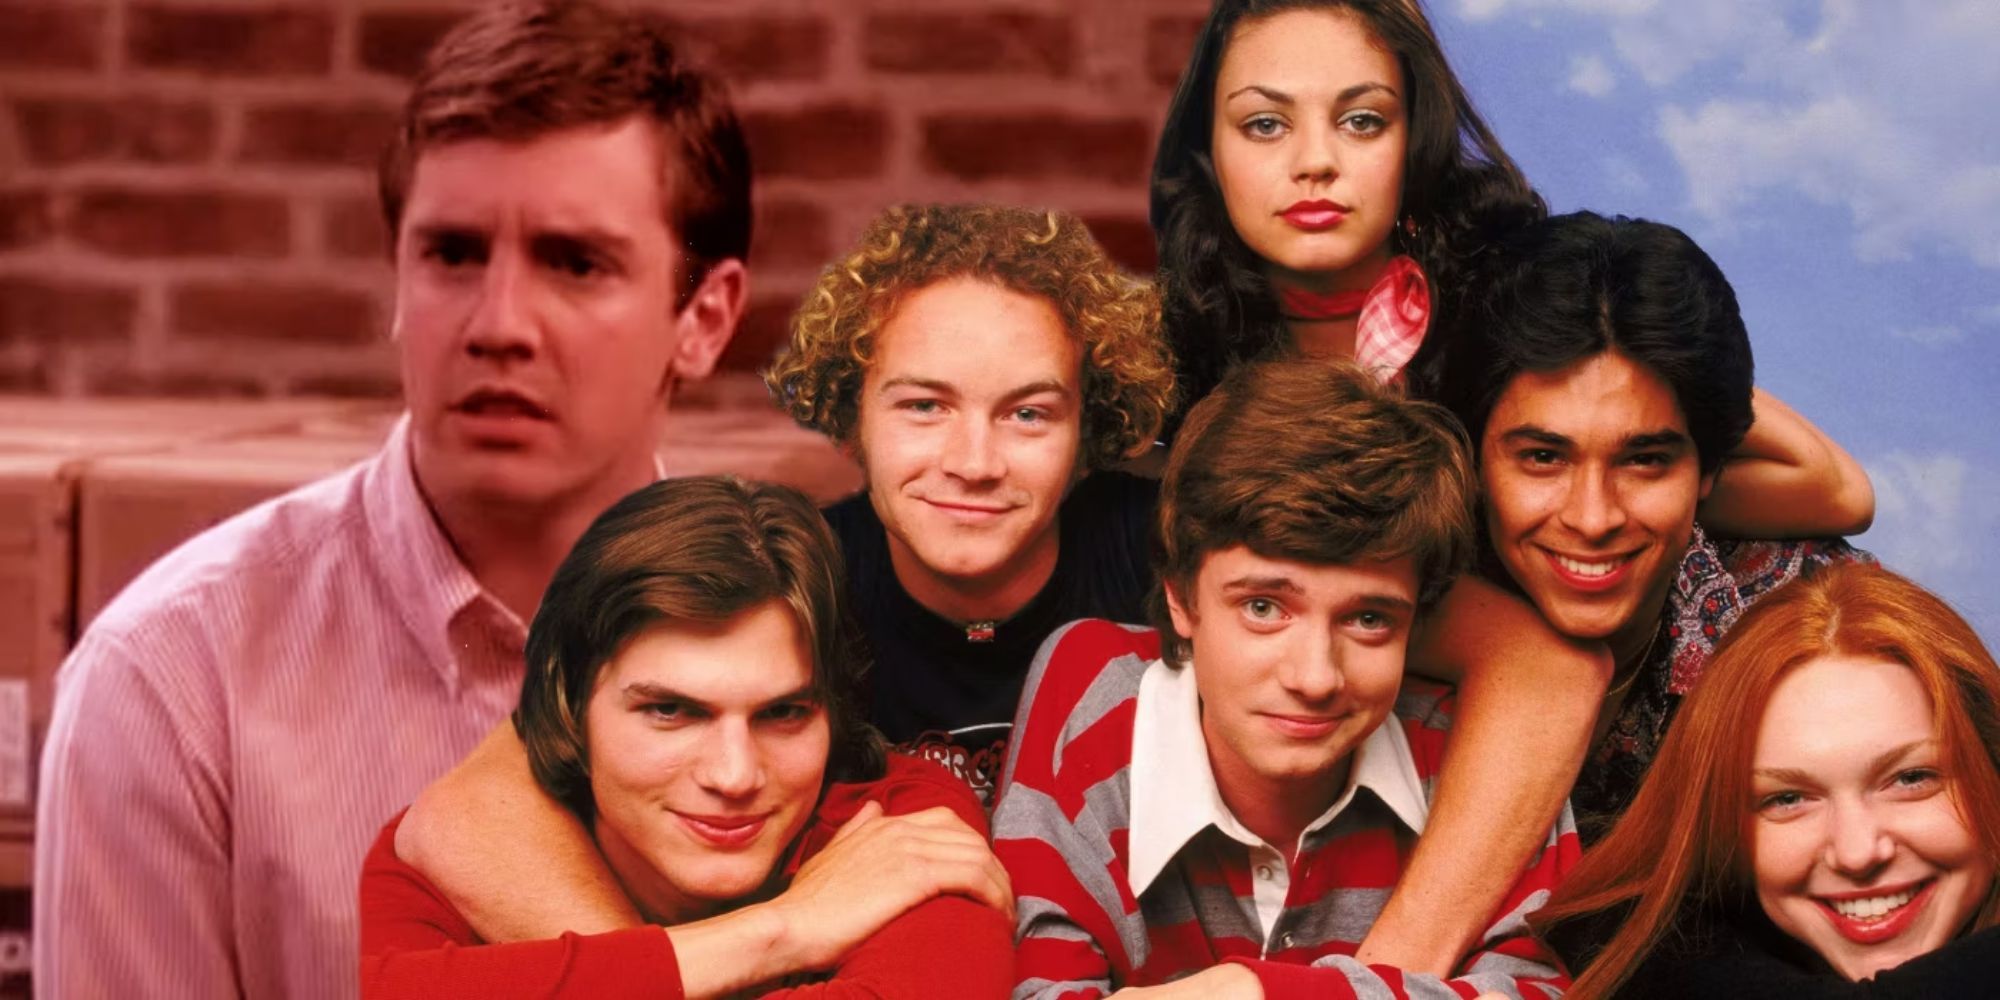 Brett Harrison and the cast of That '70s Show